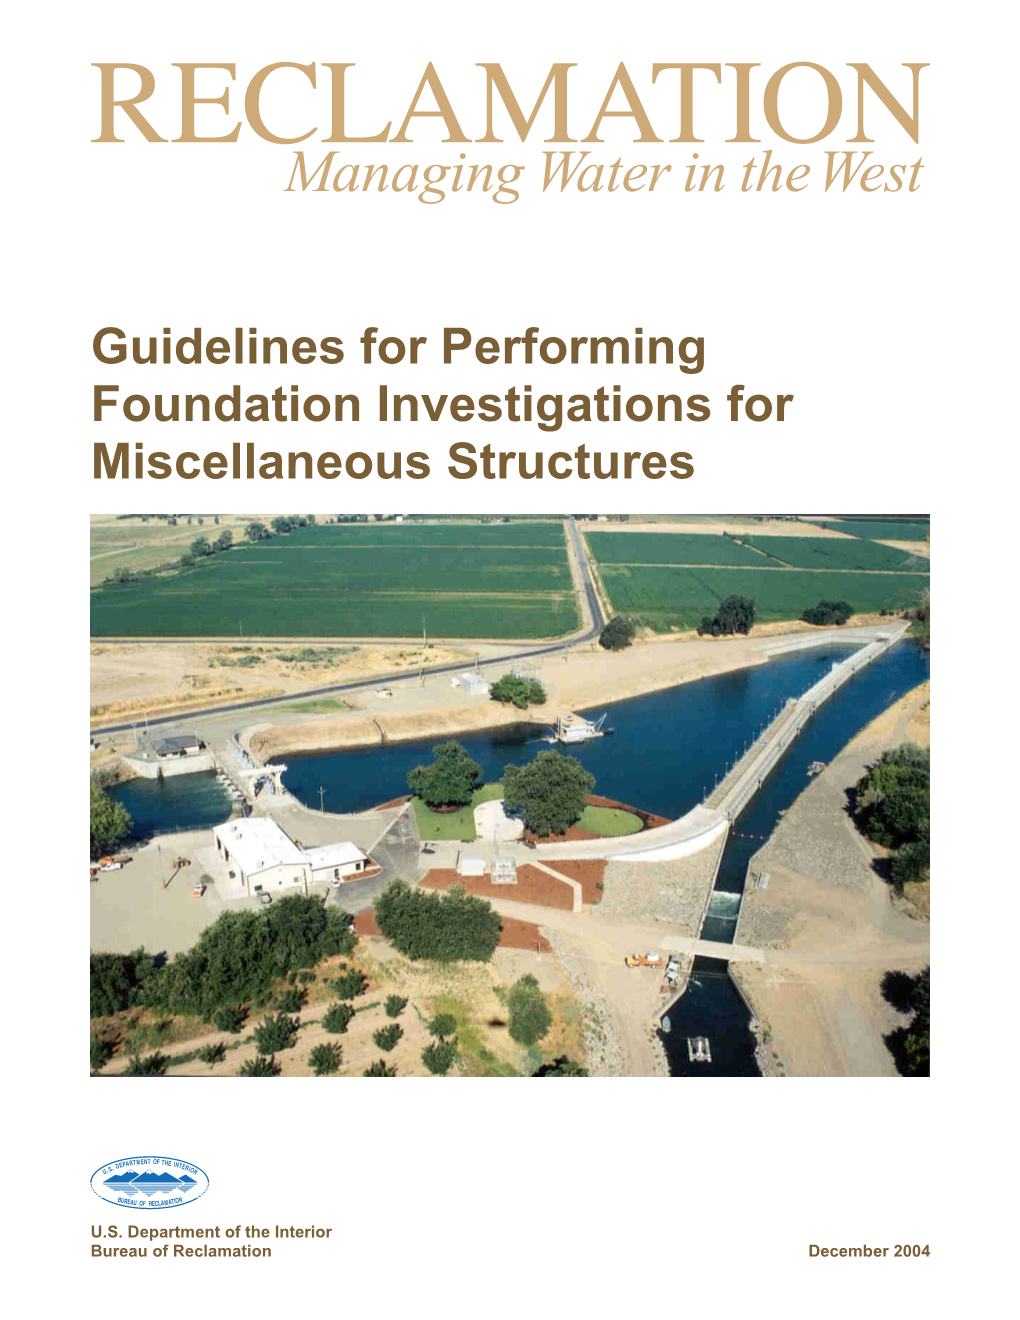 Guidelines for Performing Foundation Investigations for Miscellaneous Structures